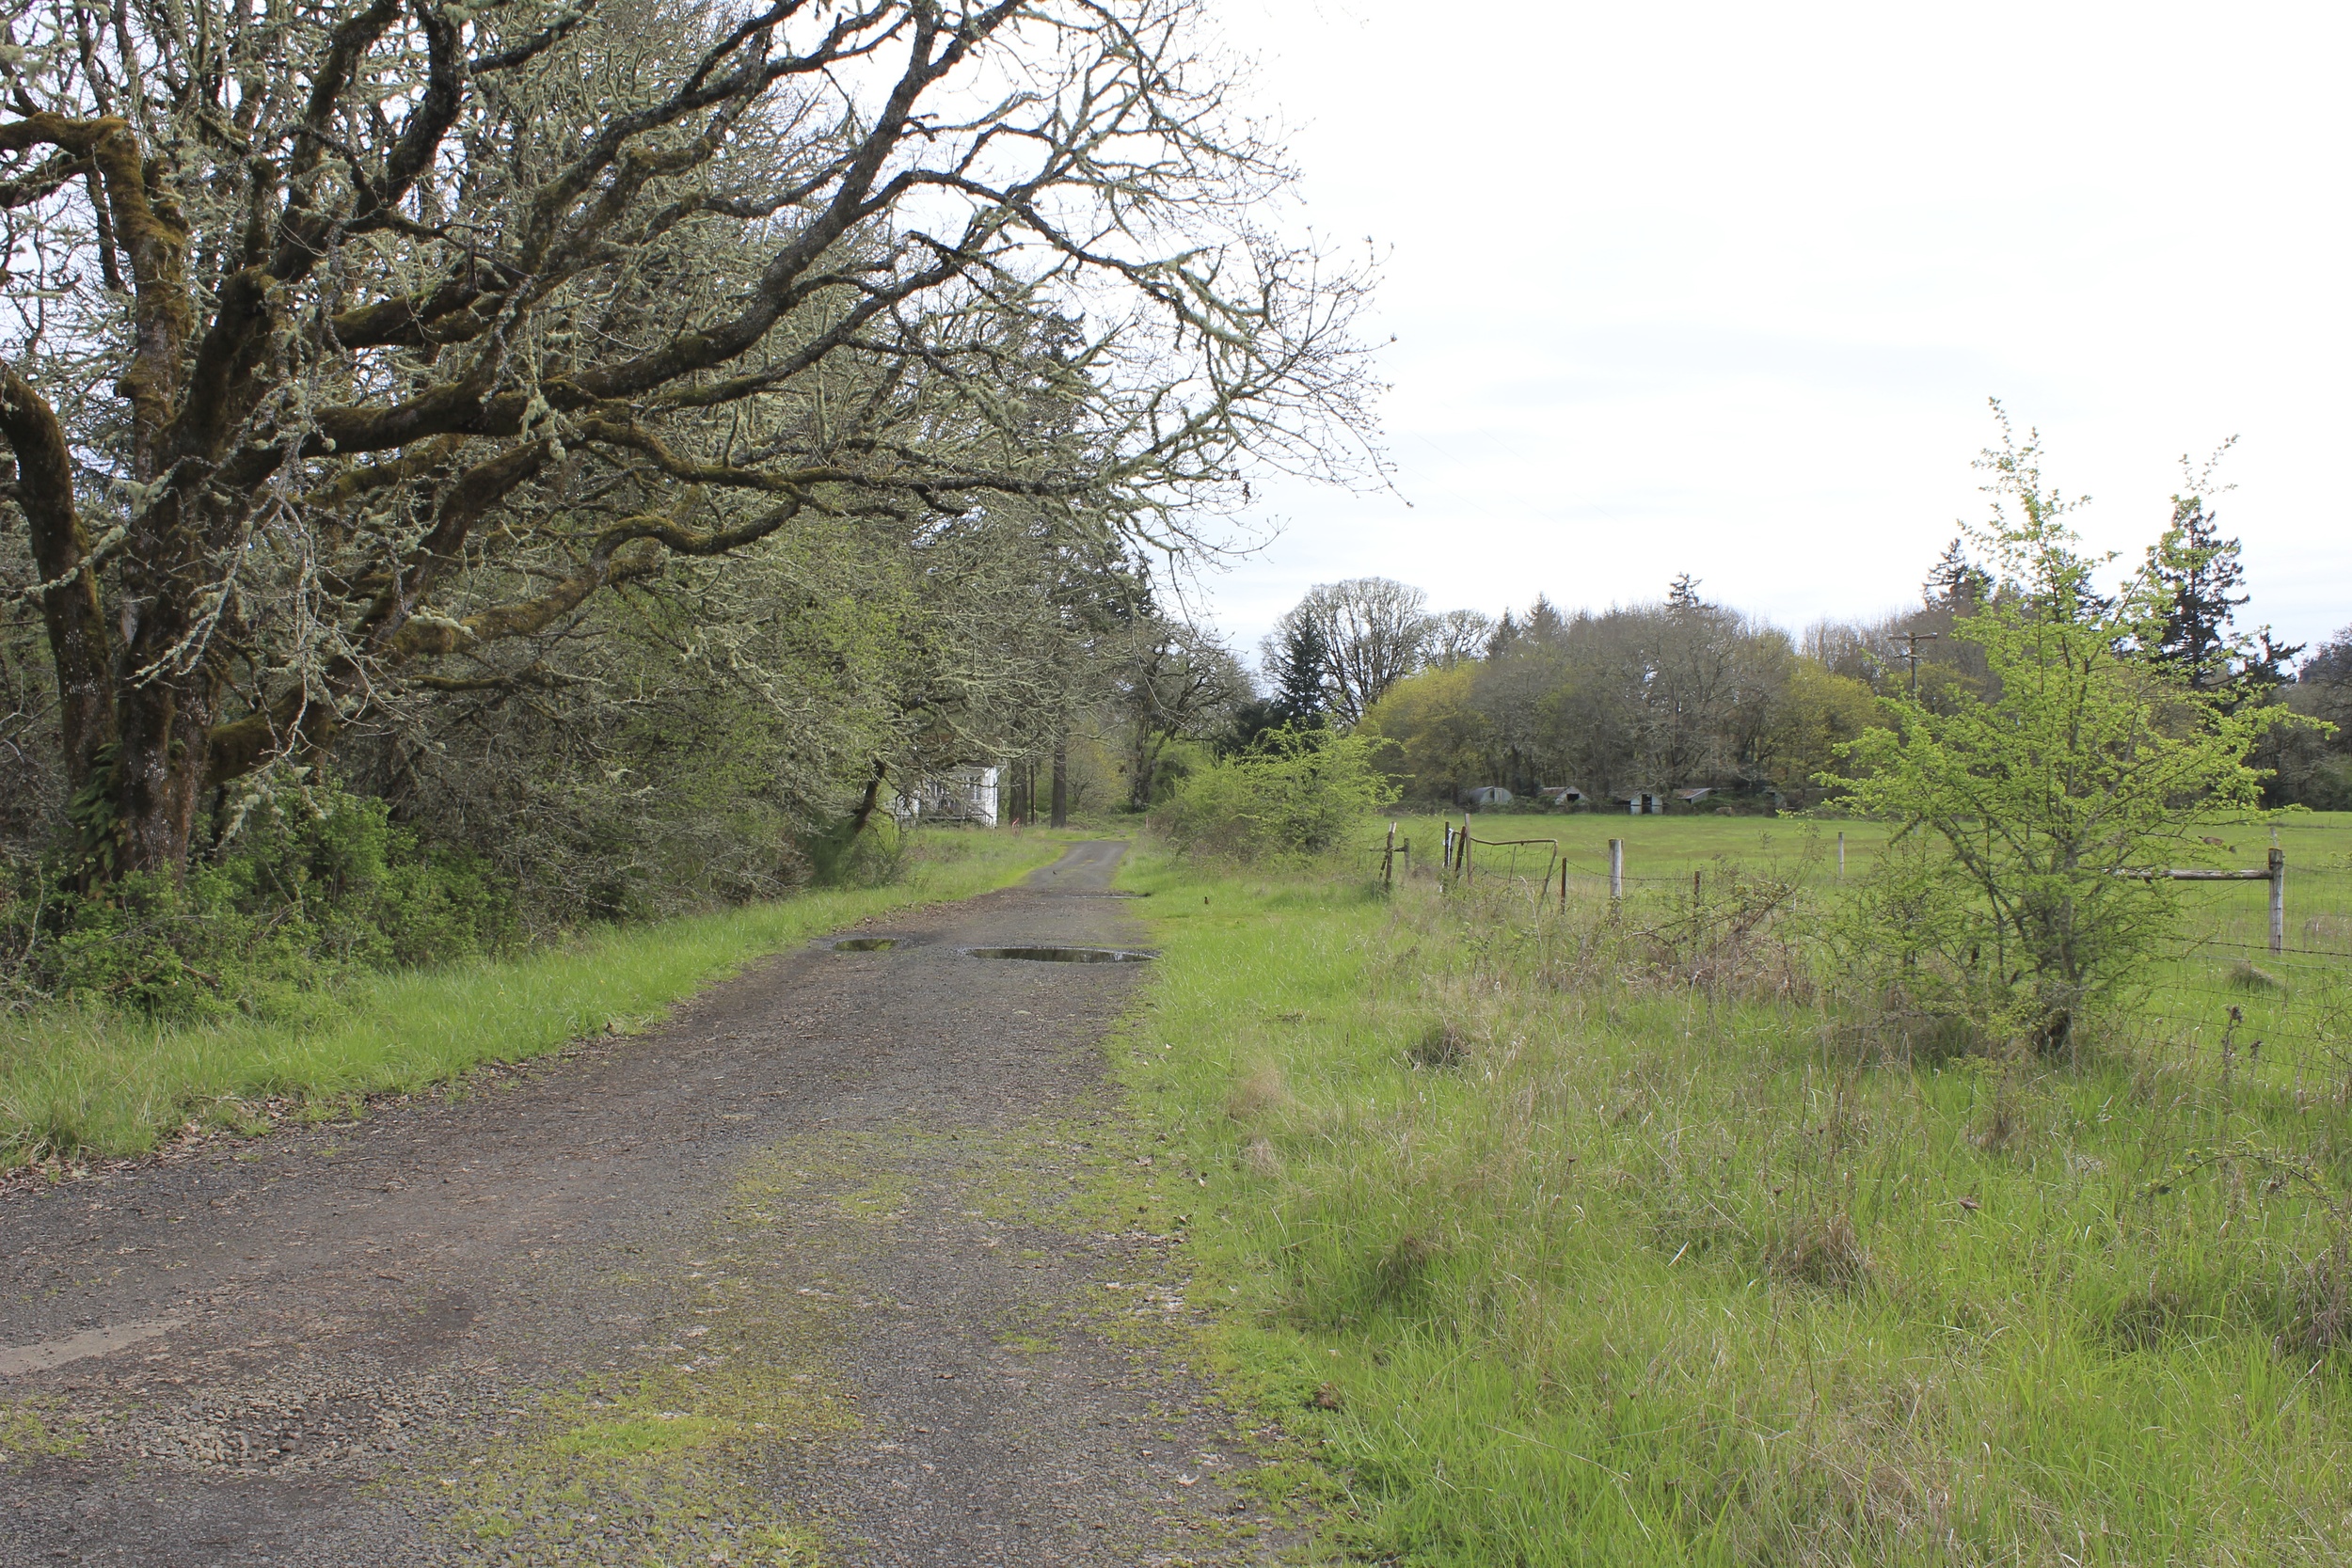  ​“South Farm” near the Oregon State University campus.&nbsp;Corvalis, OR 